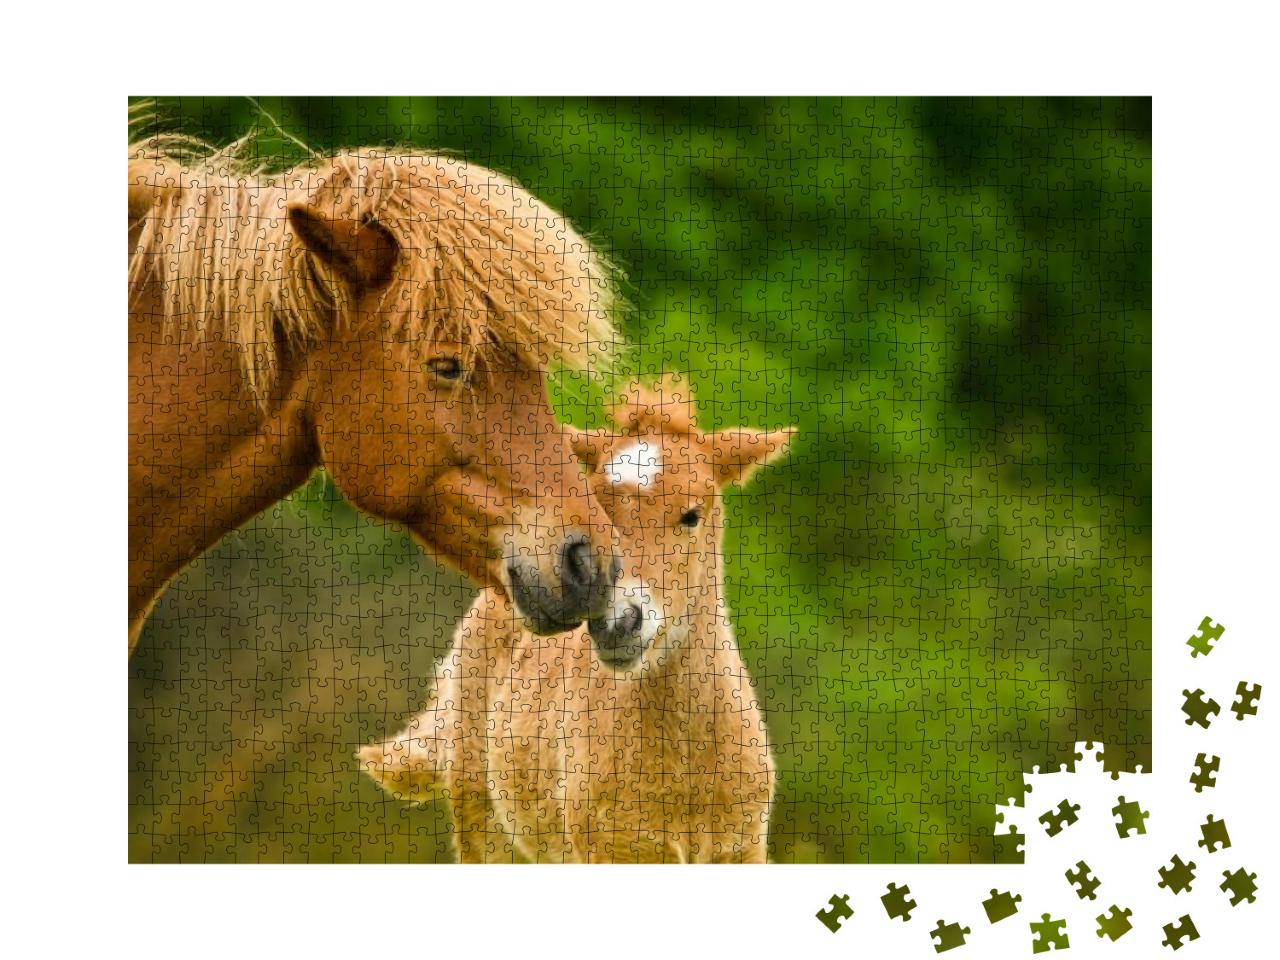 A Very Beautiful Chestnut Foal of an Icelandic Horse is S... Jigsaw Puzzle with 1000 pieces